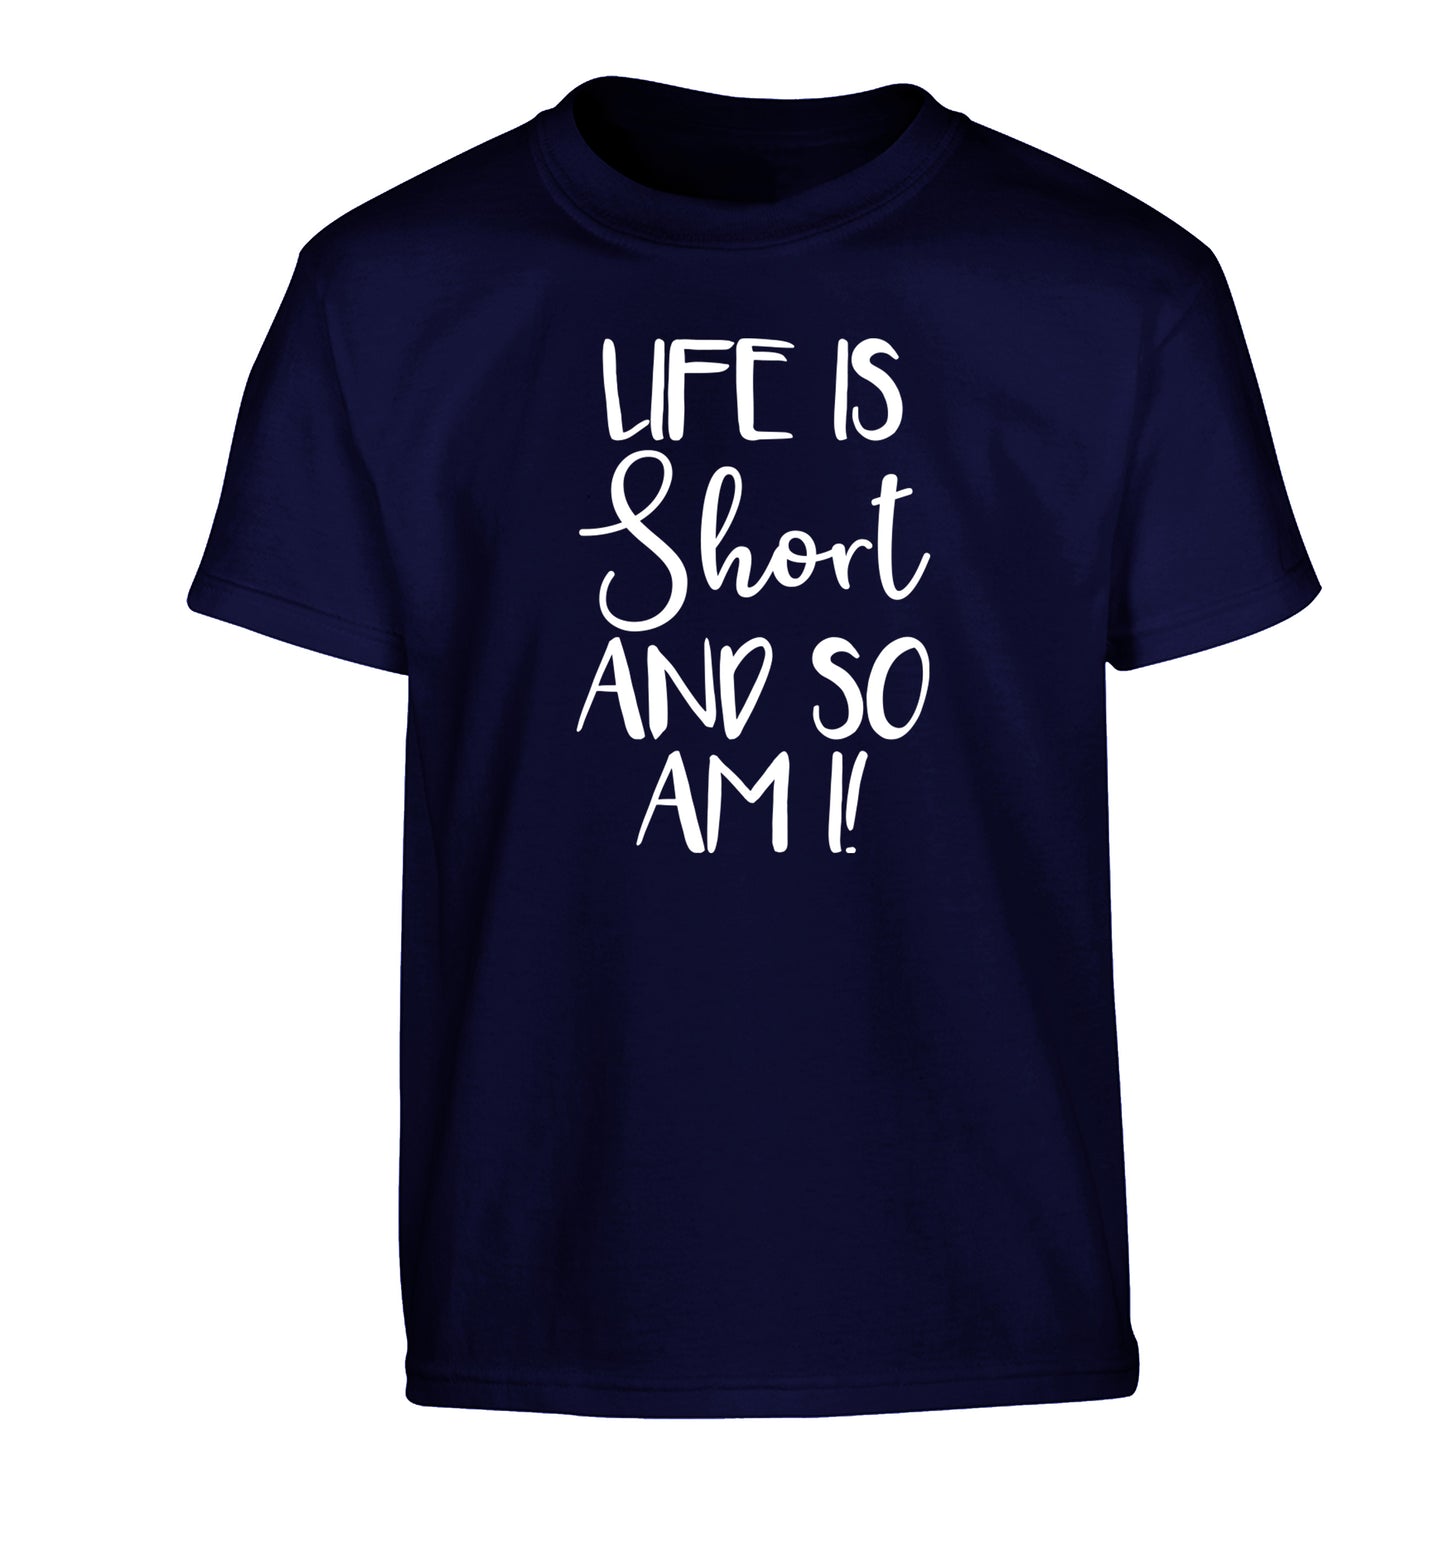 Life is short and so am I! Children's navy Tshirt 12-13 Years